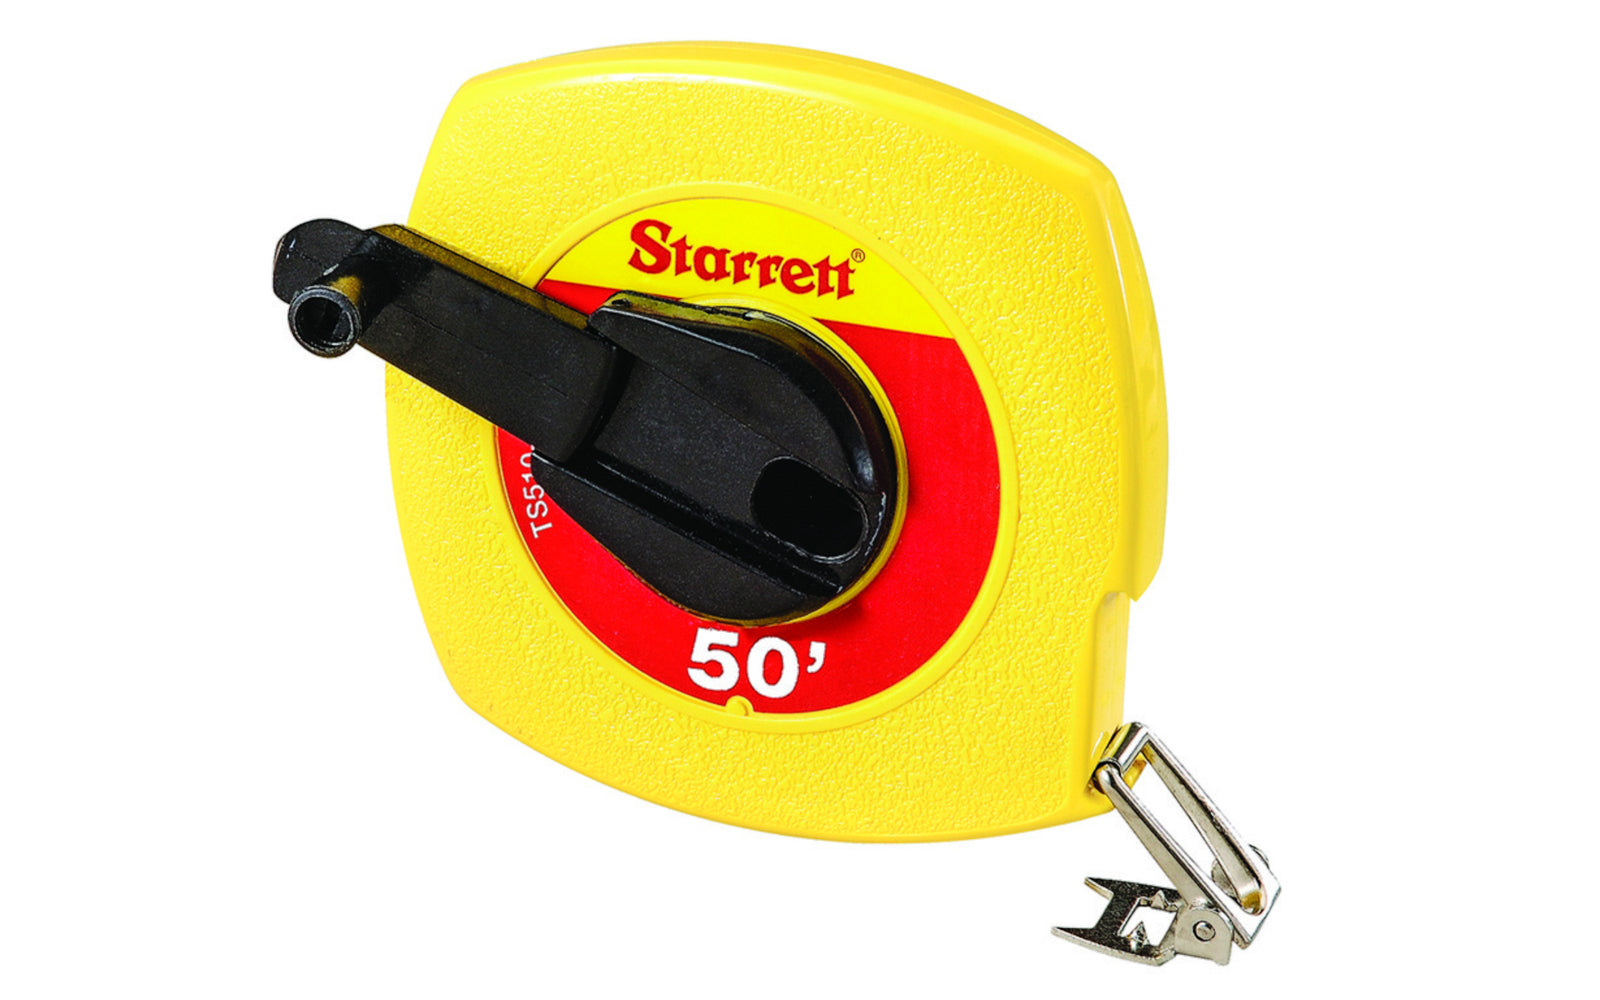 Starrett 3/8" x 50' Steel Tape Measure. The closed steel long tapes are produced with high visibility ABS plastic. These value priced long tape measures are easy to locate and difficult to damage. The steel blade provides a precise measurement of up to 50'. The blade has a clear uncluttered line and numbering style.